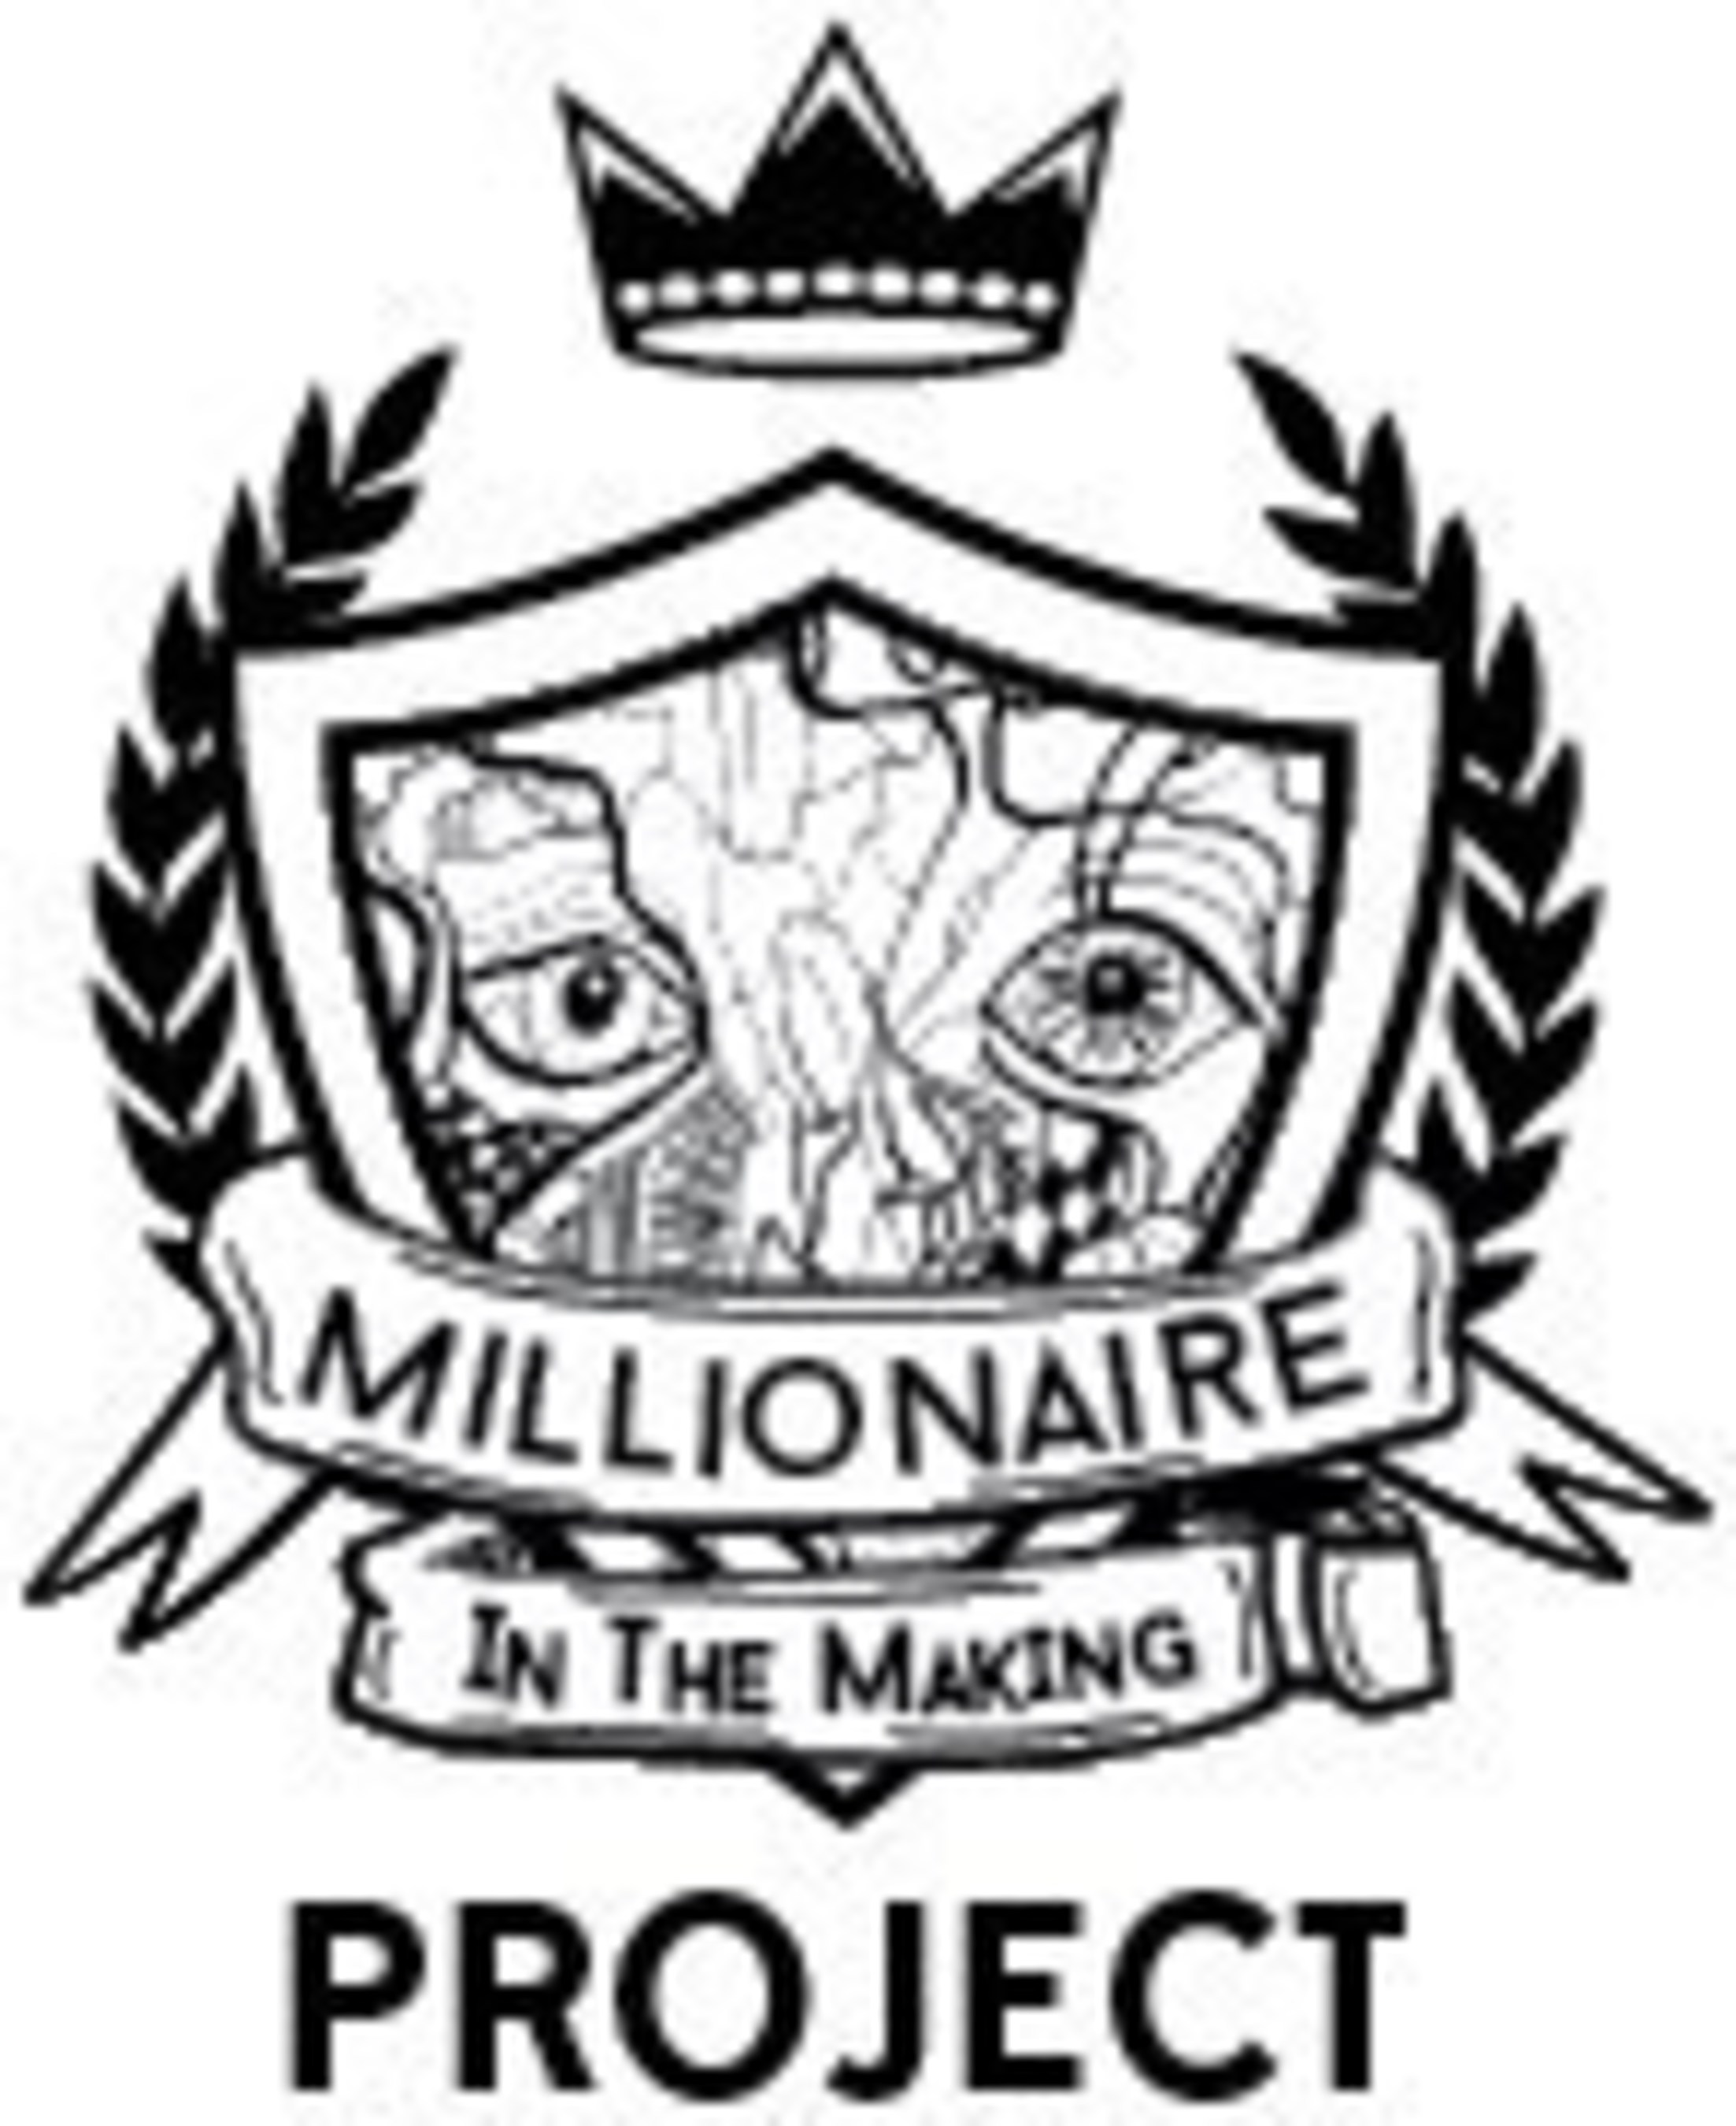 Millionaire In The Making Project logo (PRNewsFoto/Millionaire In The Making) (PRNewsFoto/Millionaire In The Making)